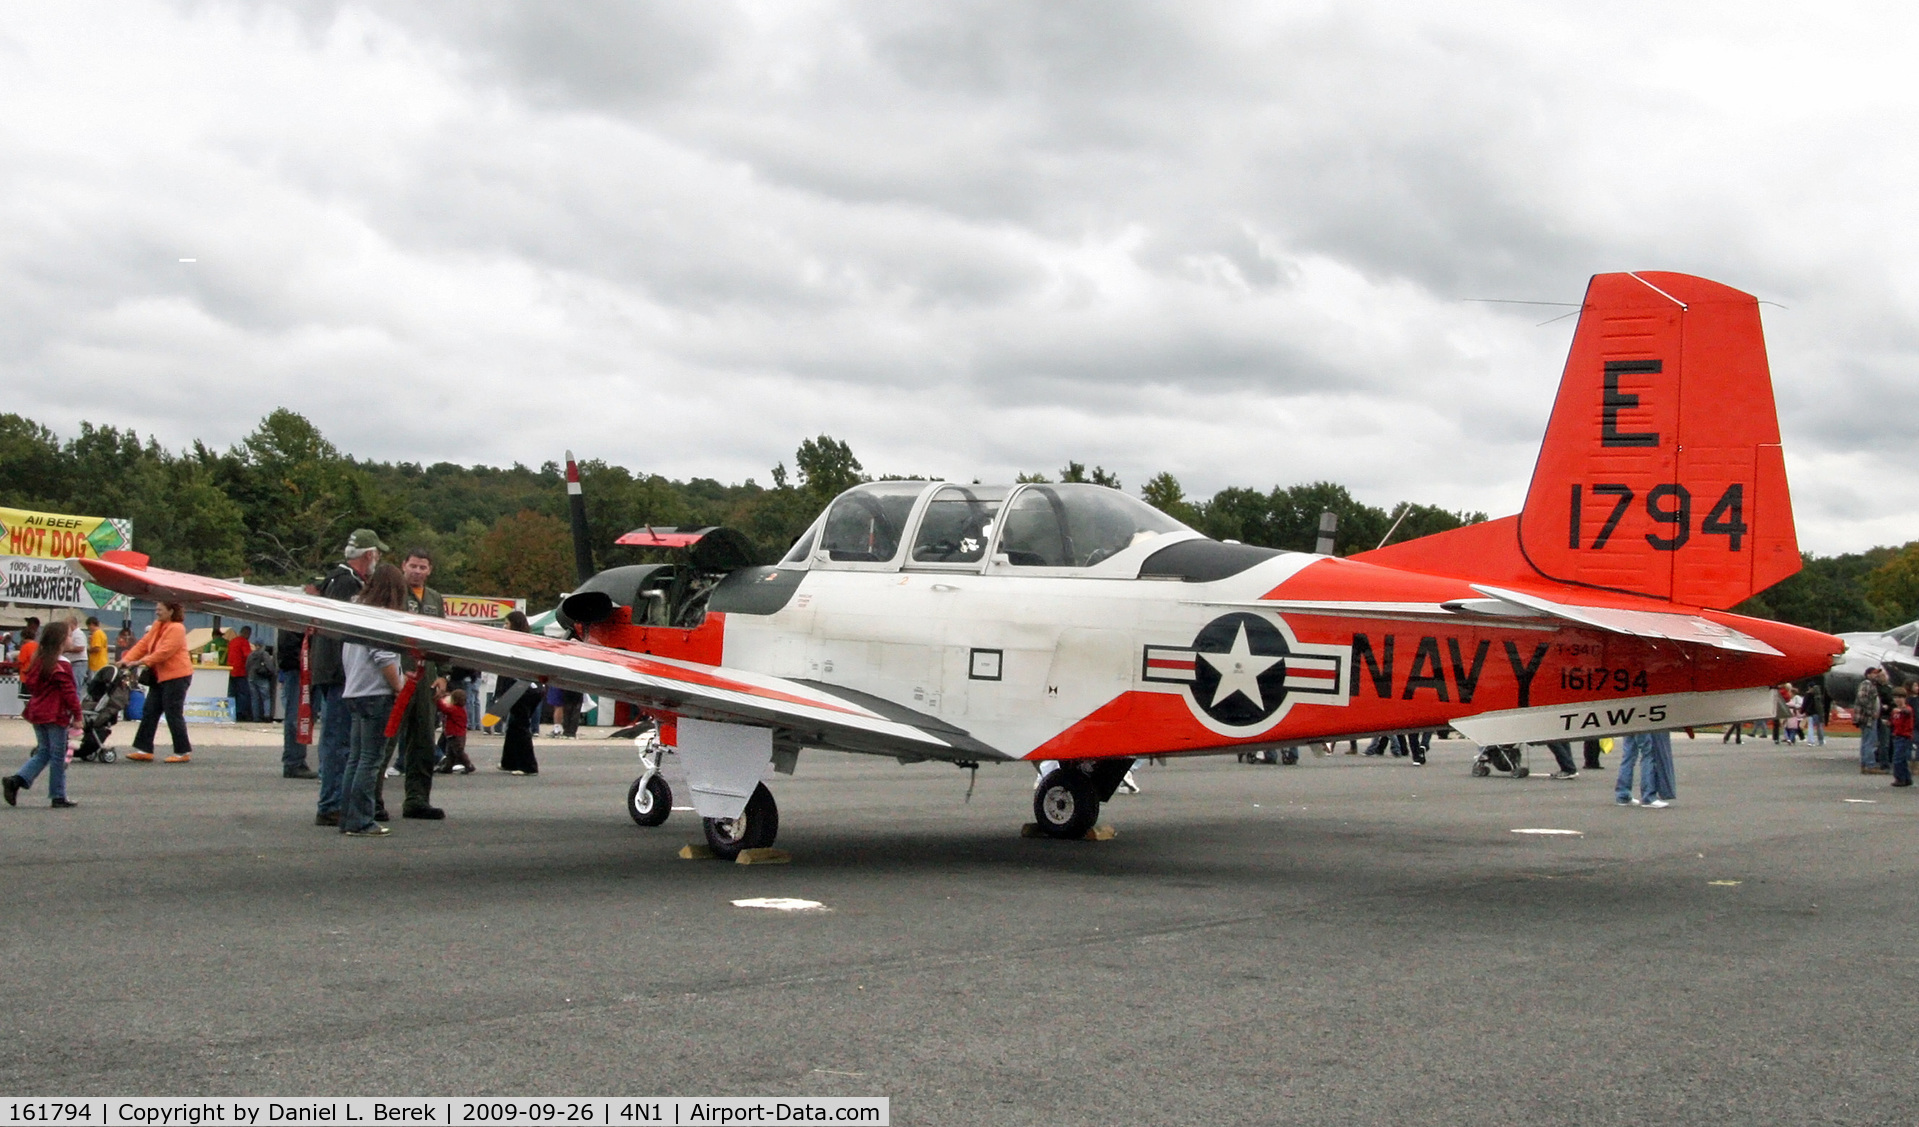 161794, Beech T-34C Turbo  Mentor C/N GL-189, This Turbo Mentor had plenty of admirers at a 2009 airshow at Greenwood Lake Airport.  I got the c/n from the manufacturer's plate on this aircraft.